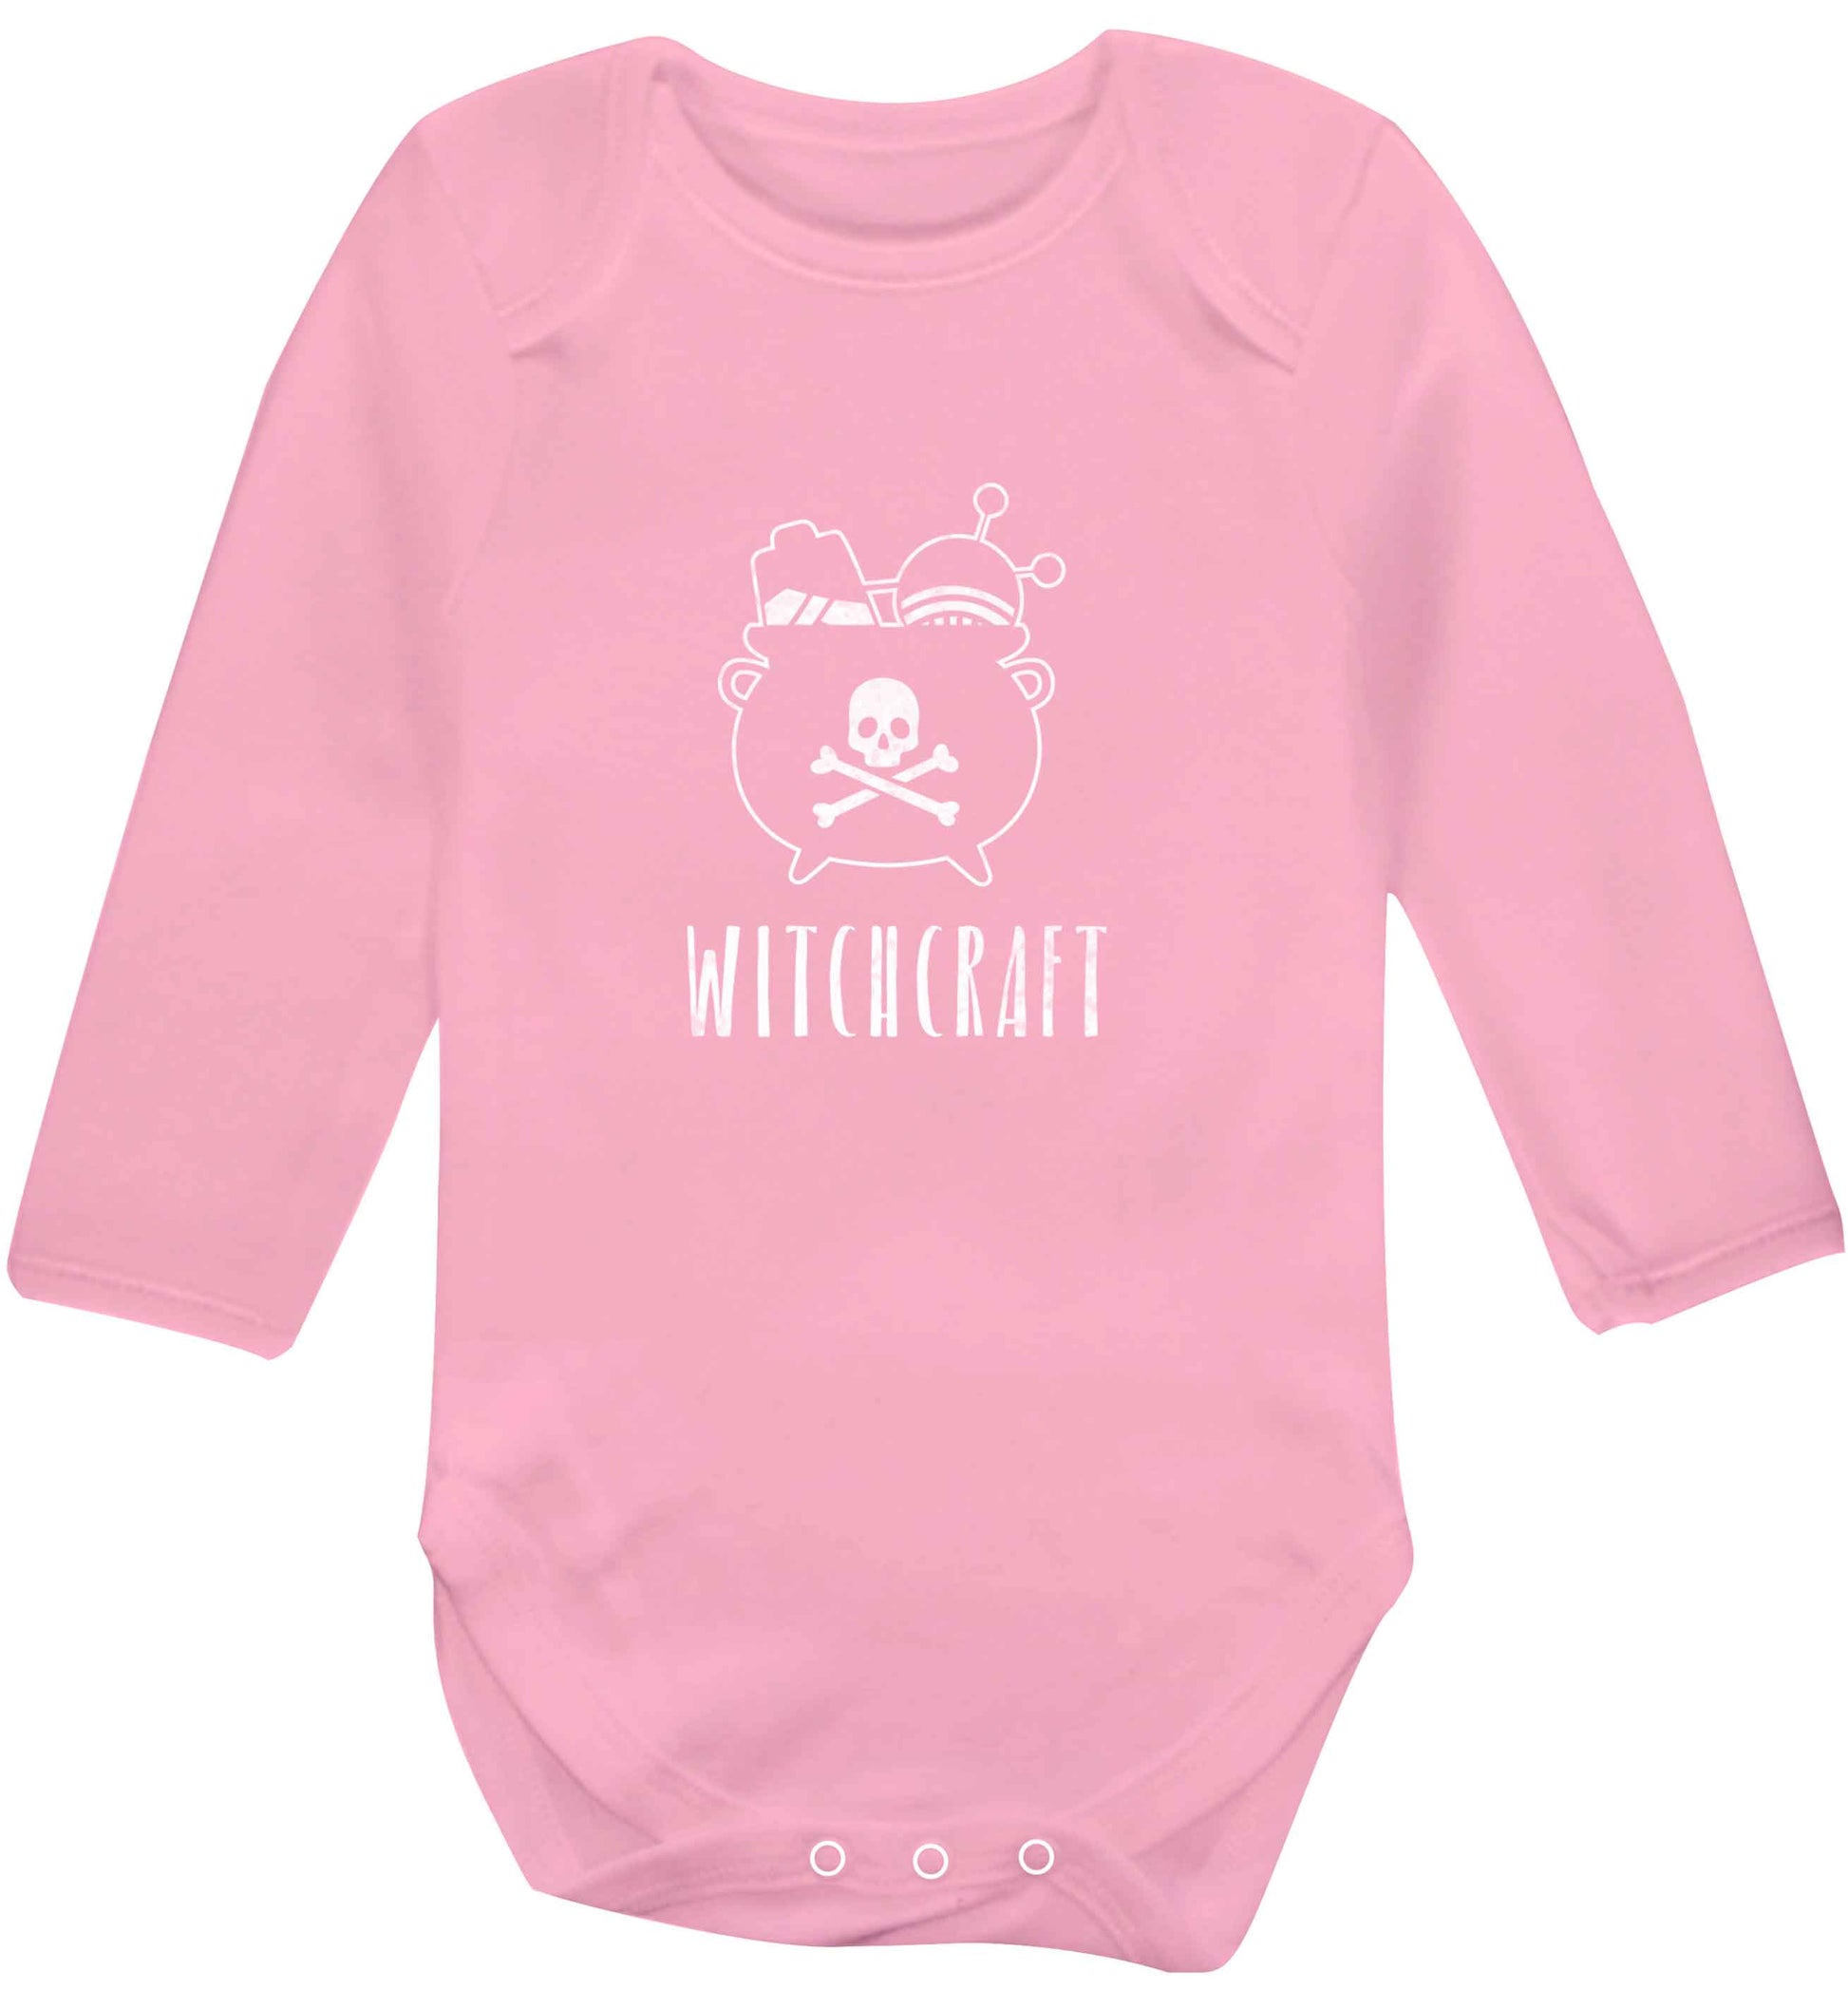 Witchcraft baby vest long sleeved pale pink 6-12 months